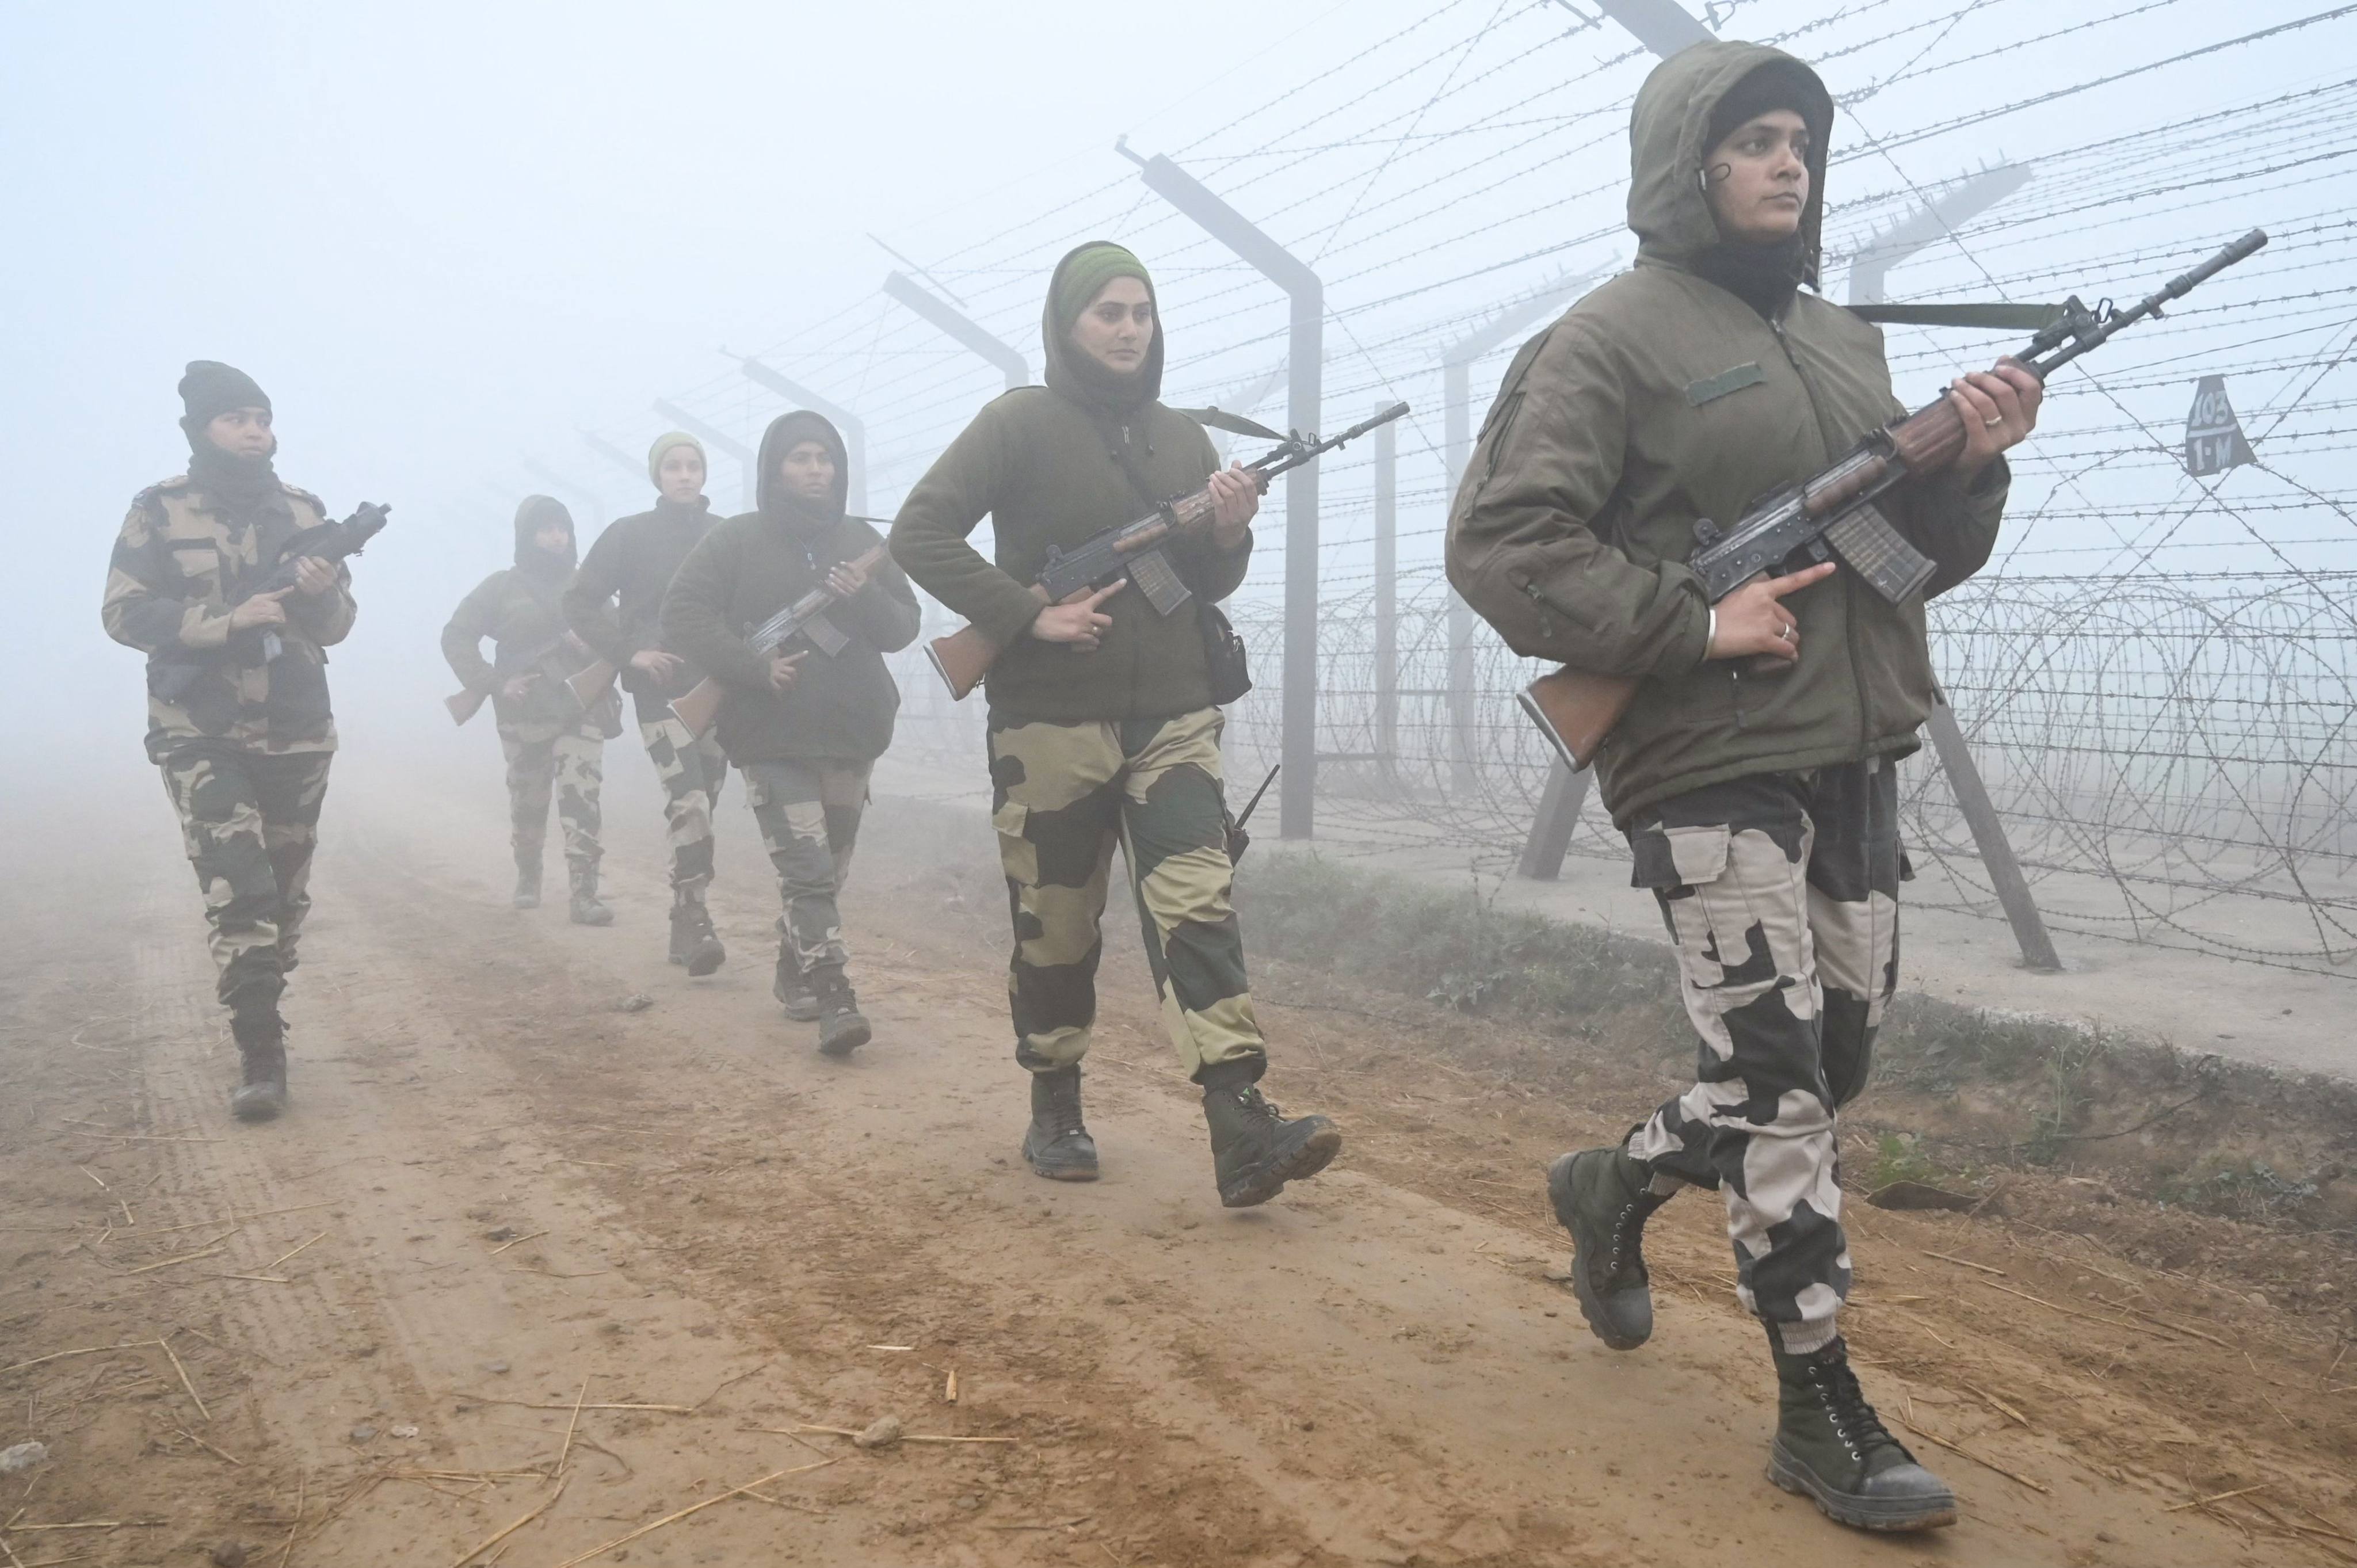 Border Security Force personnel patrol along the border fence during a cold, foggy morning near India-Pakistan Wagah border about 40km from Amritsar in December 2022. Photo: AFP